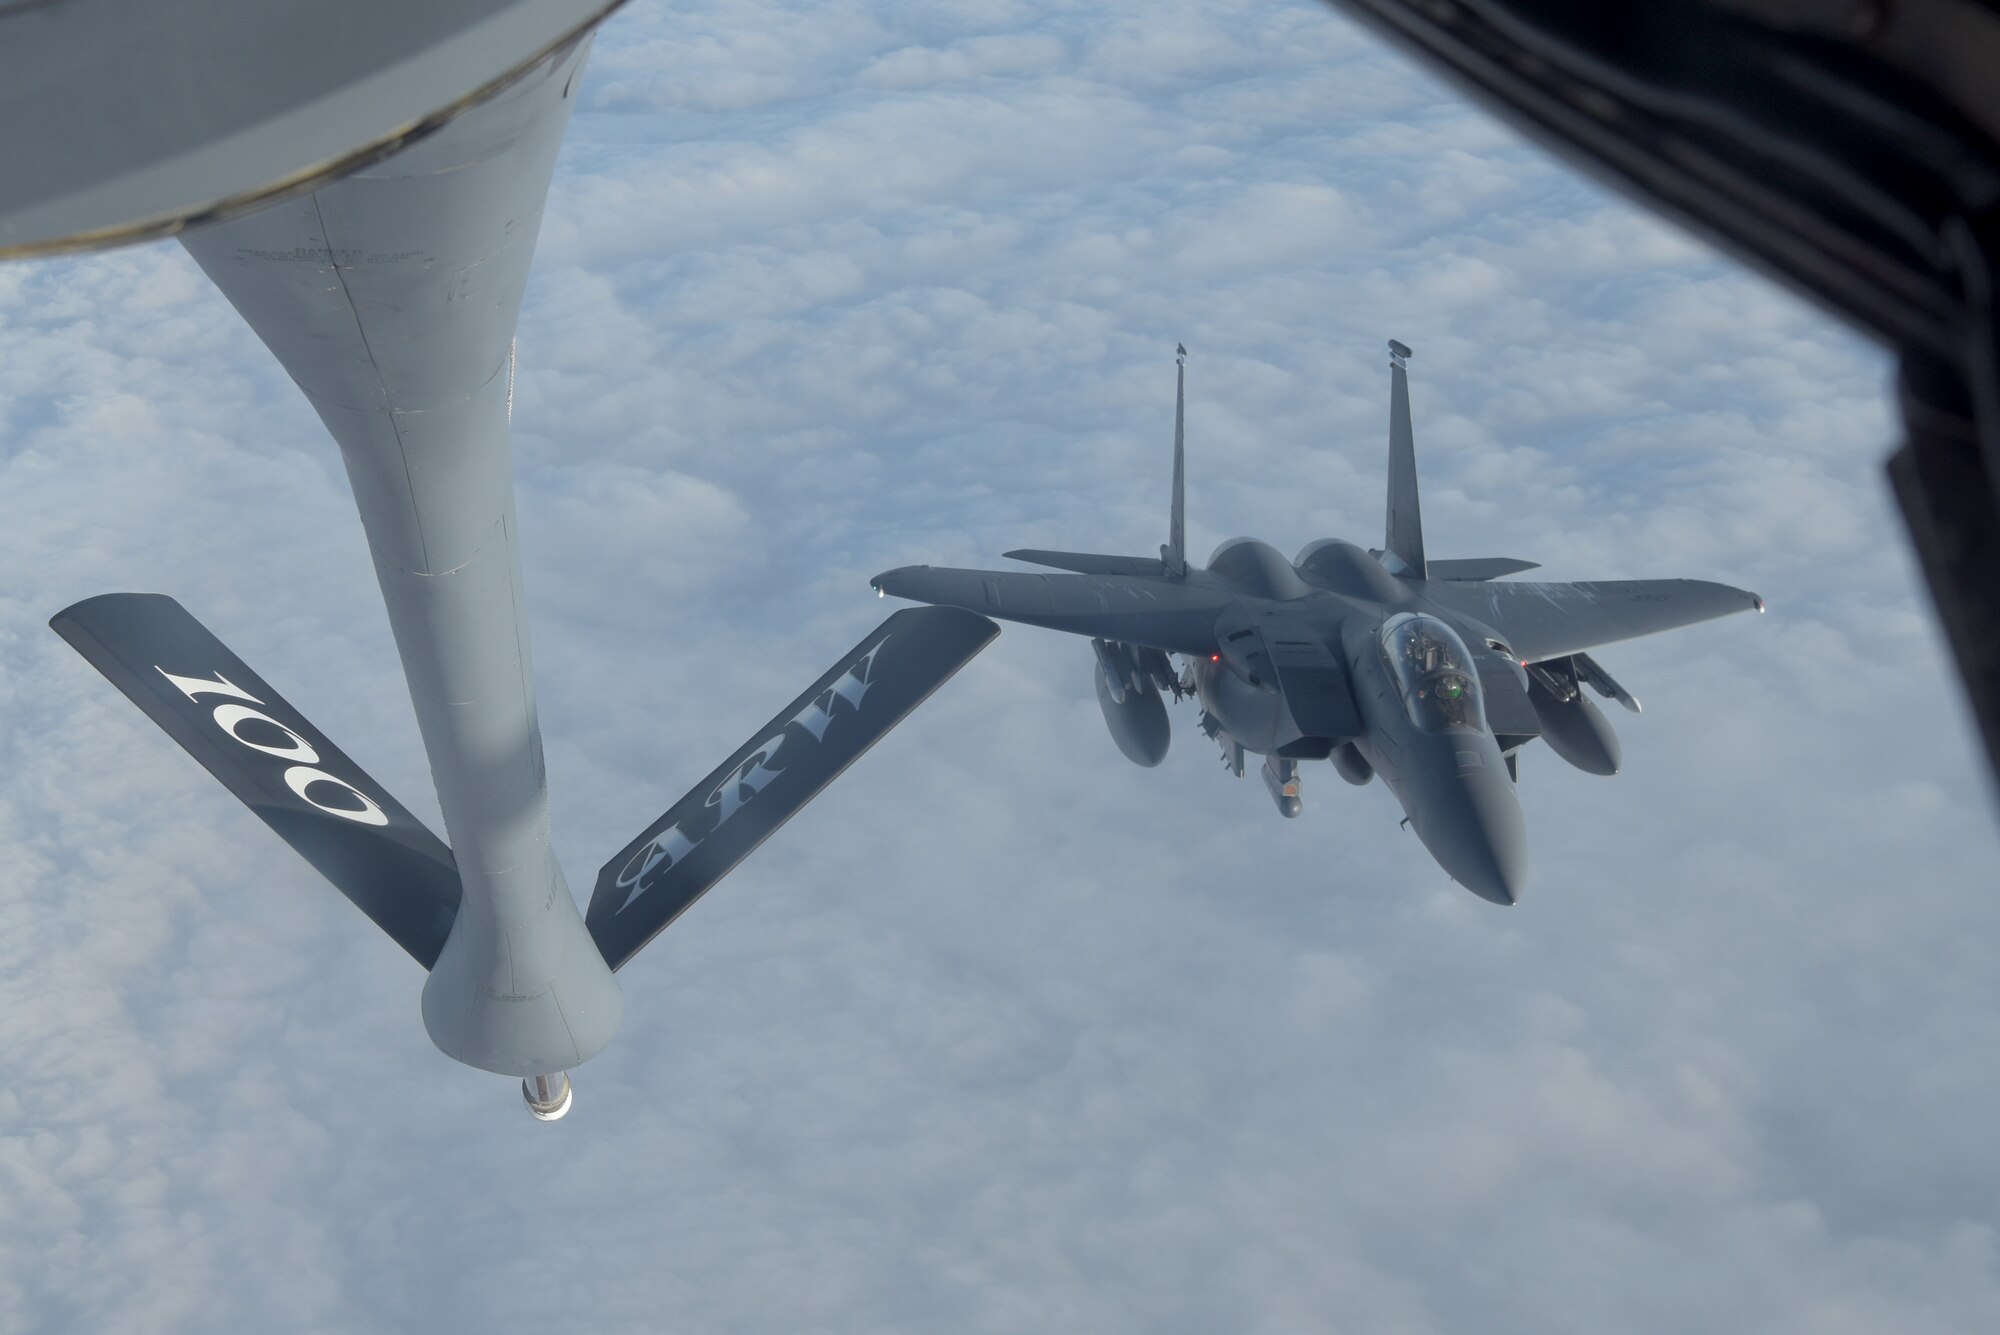 A U.S. Air Force F-15E Strike Eagle assigned to the 492nd Fighter Squadron, RAF Lakenheath, England, prepares to receive fuel from a 100th Air Refueling Wing KC-135 Stratotanker during the Allied Combat Lethality Exercise over Poland, Dec. 10, 2019. These exercises allow United States Air Forces in Europe – Air Forces Africa to enhance interoperability between the U.S. Air Force and NATO allies and partners. (U.S. Air Force photo by Senior Airman Benjamin Cooper)